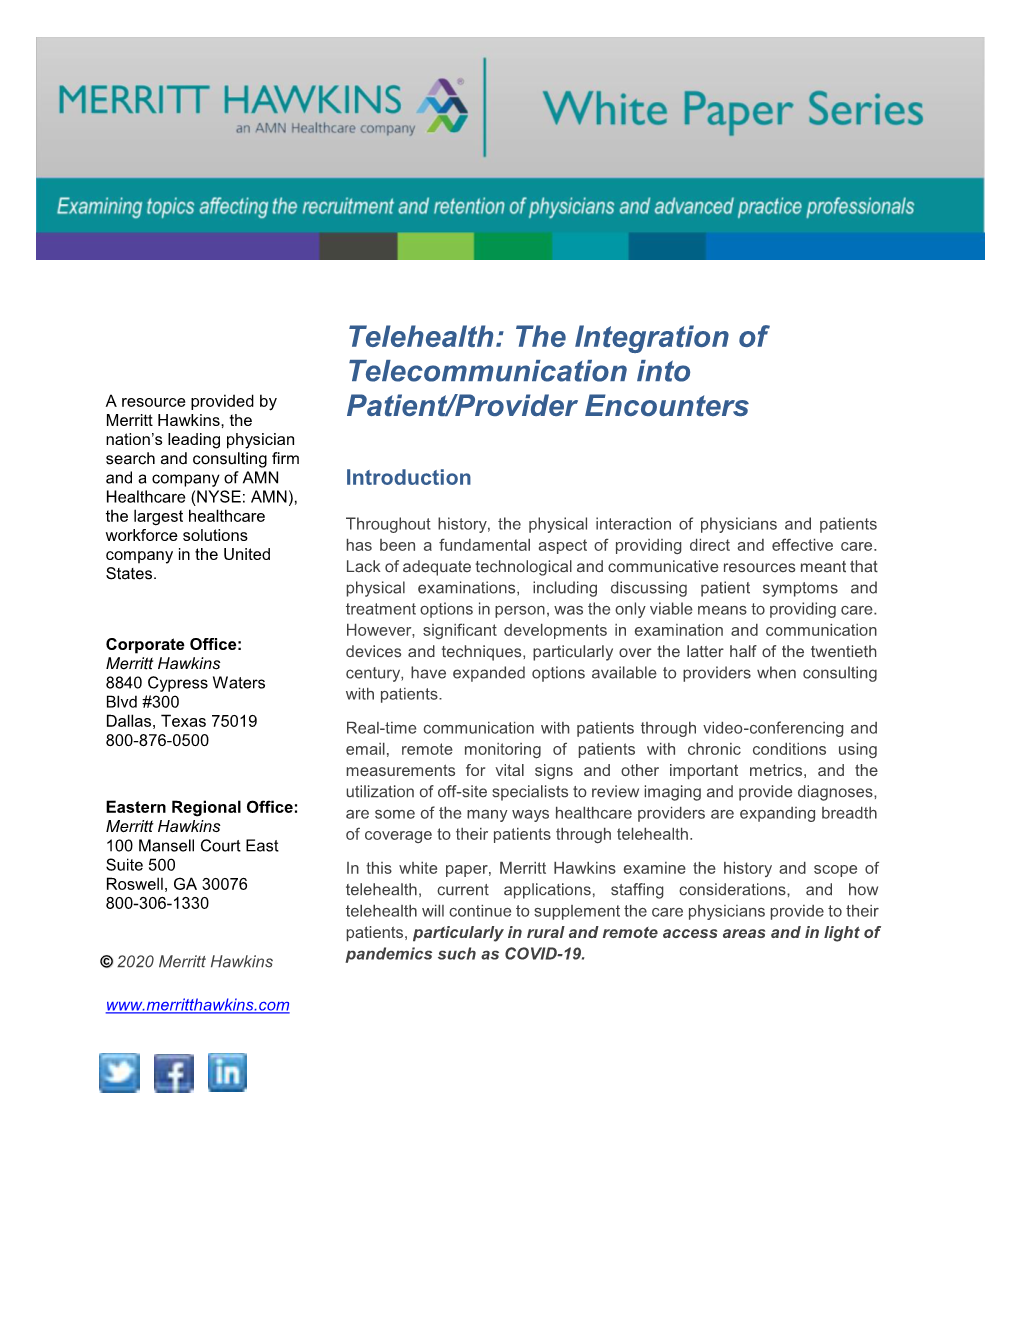 Telehealth: the Integration of Telecommunication Into Patient/Provider Encounters